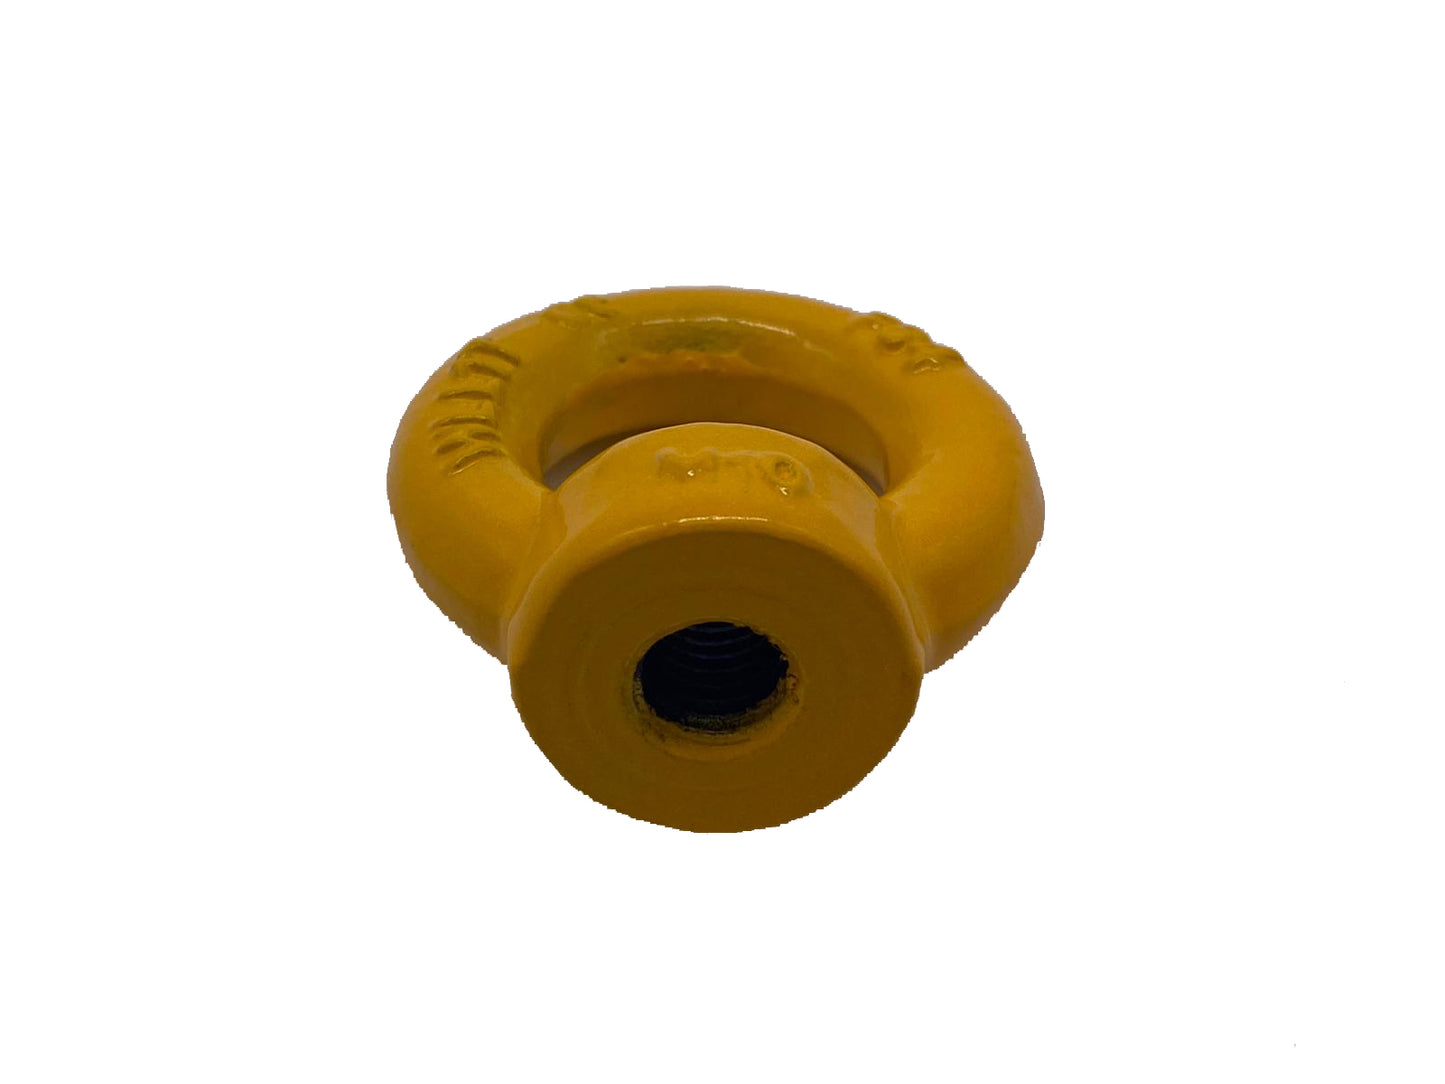 Grade 80 High Tensile Lifting Eyenut (285-15) available from RiggingUK on a next day delivery